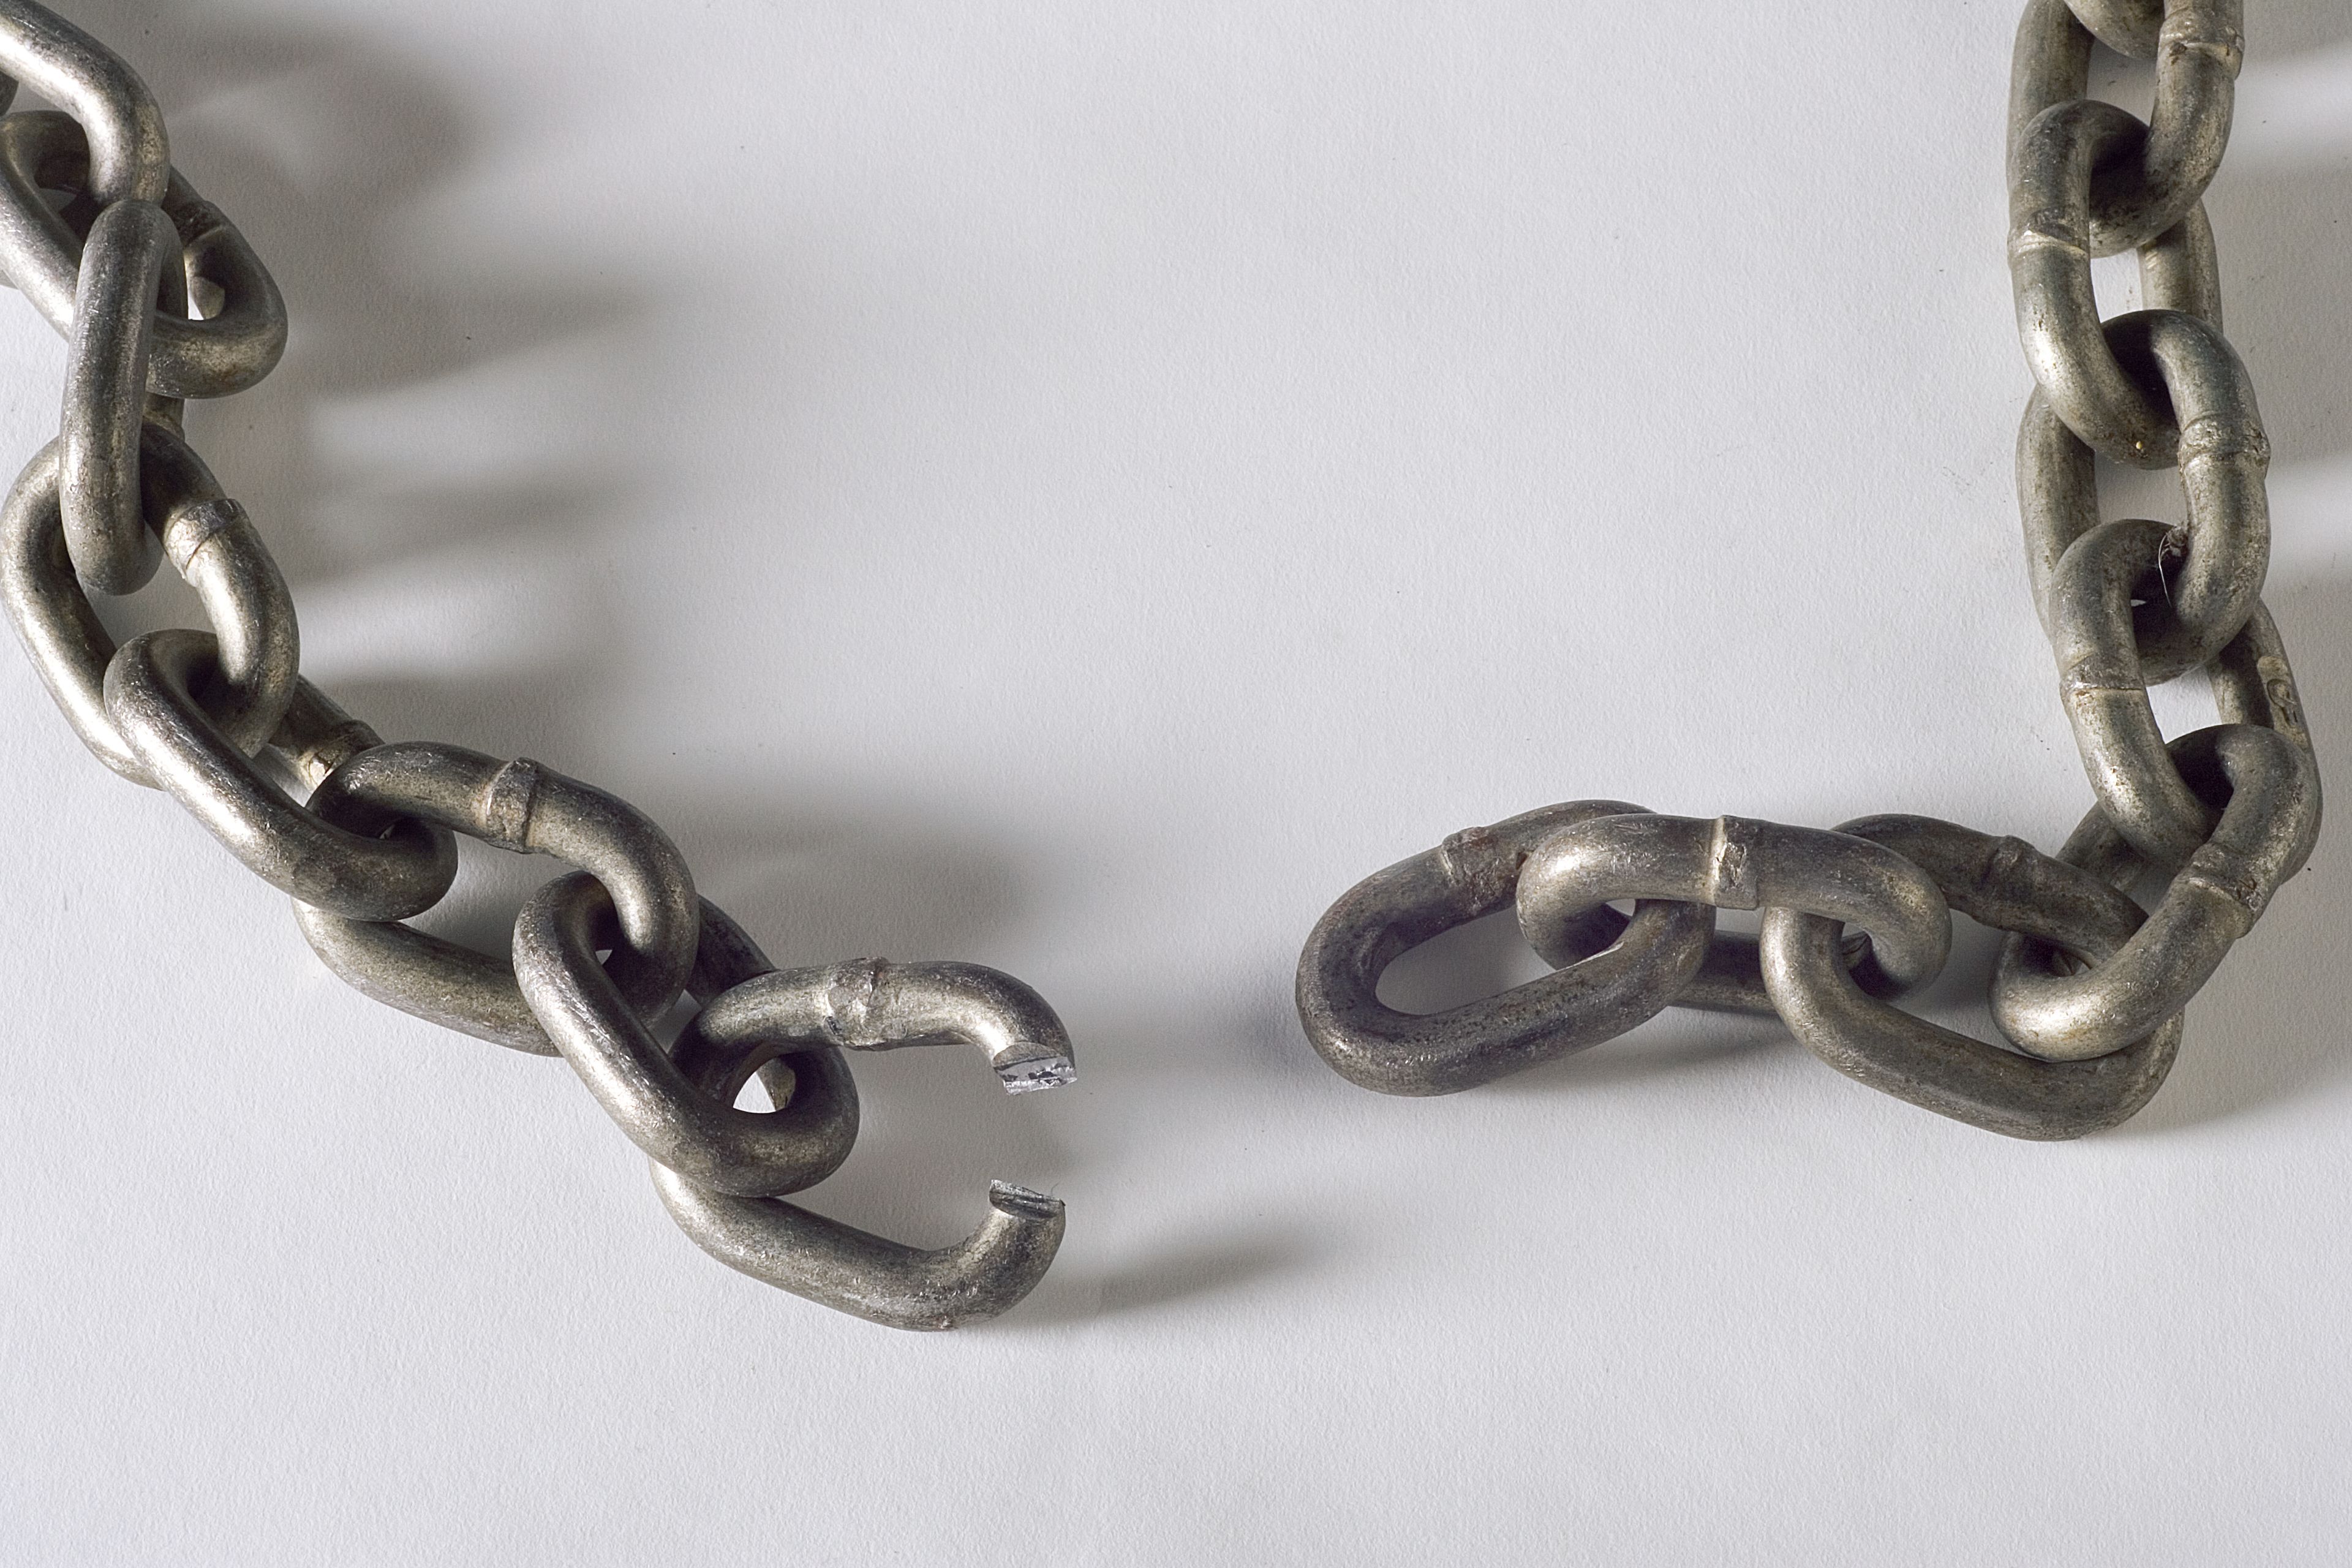 A heavy chain shown with a broken link.